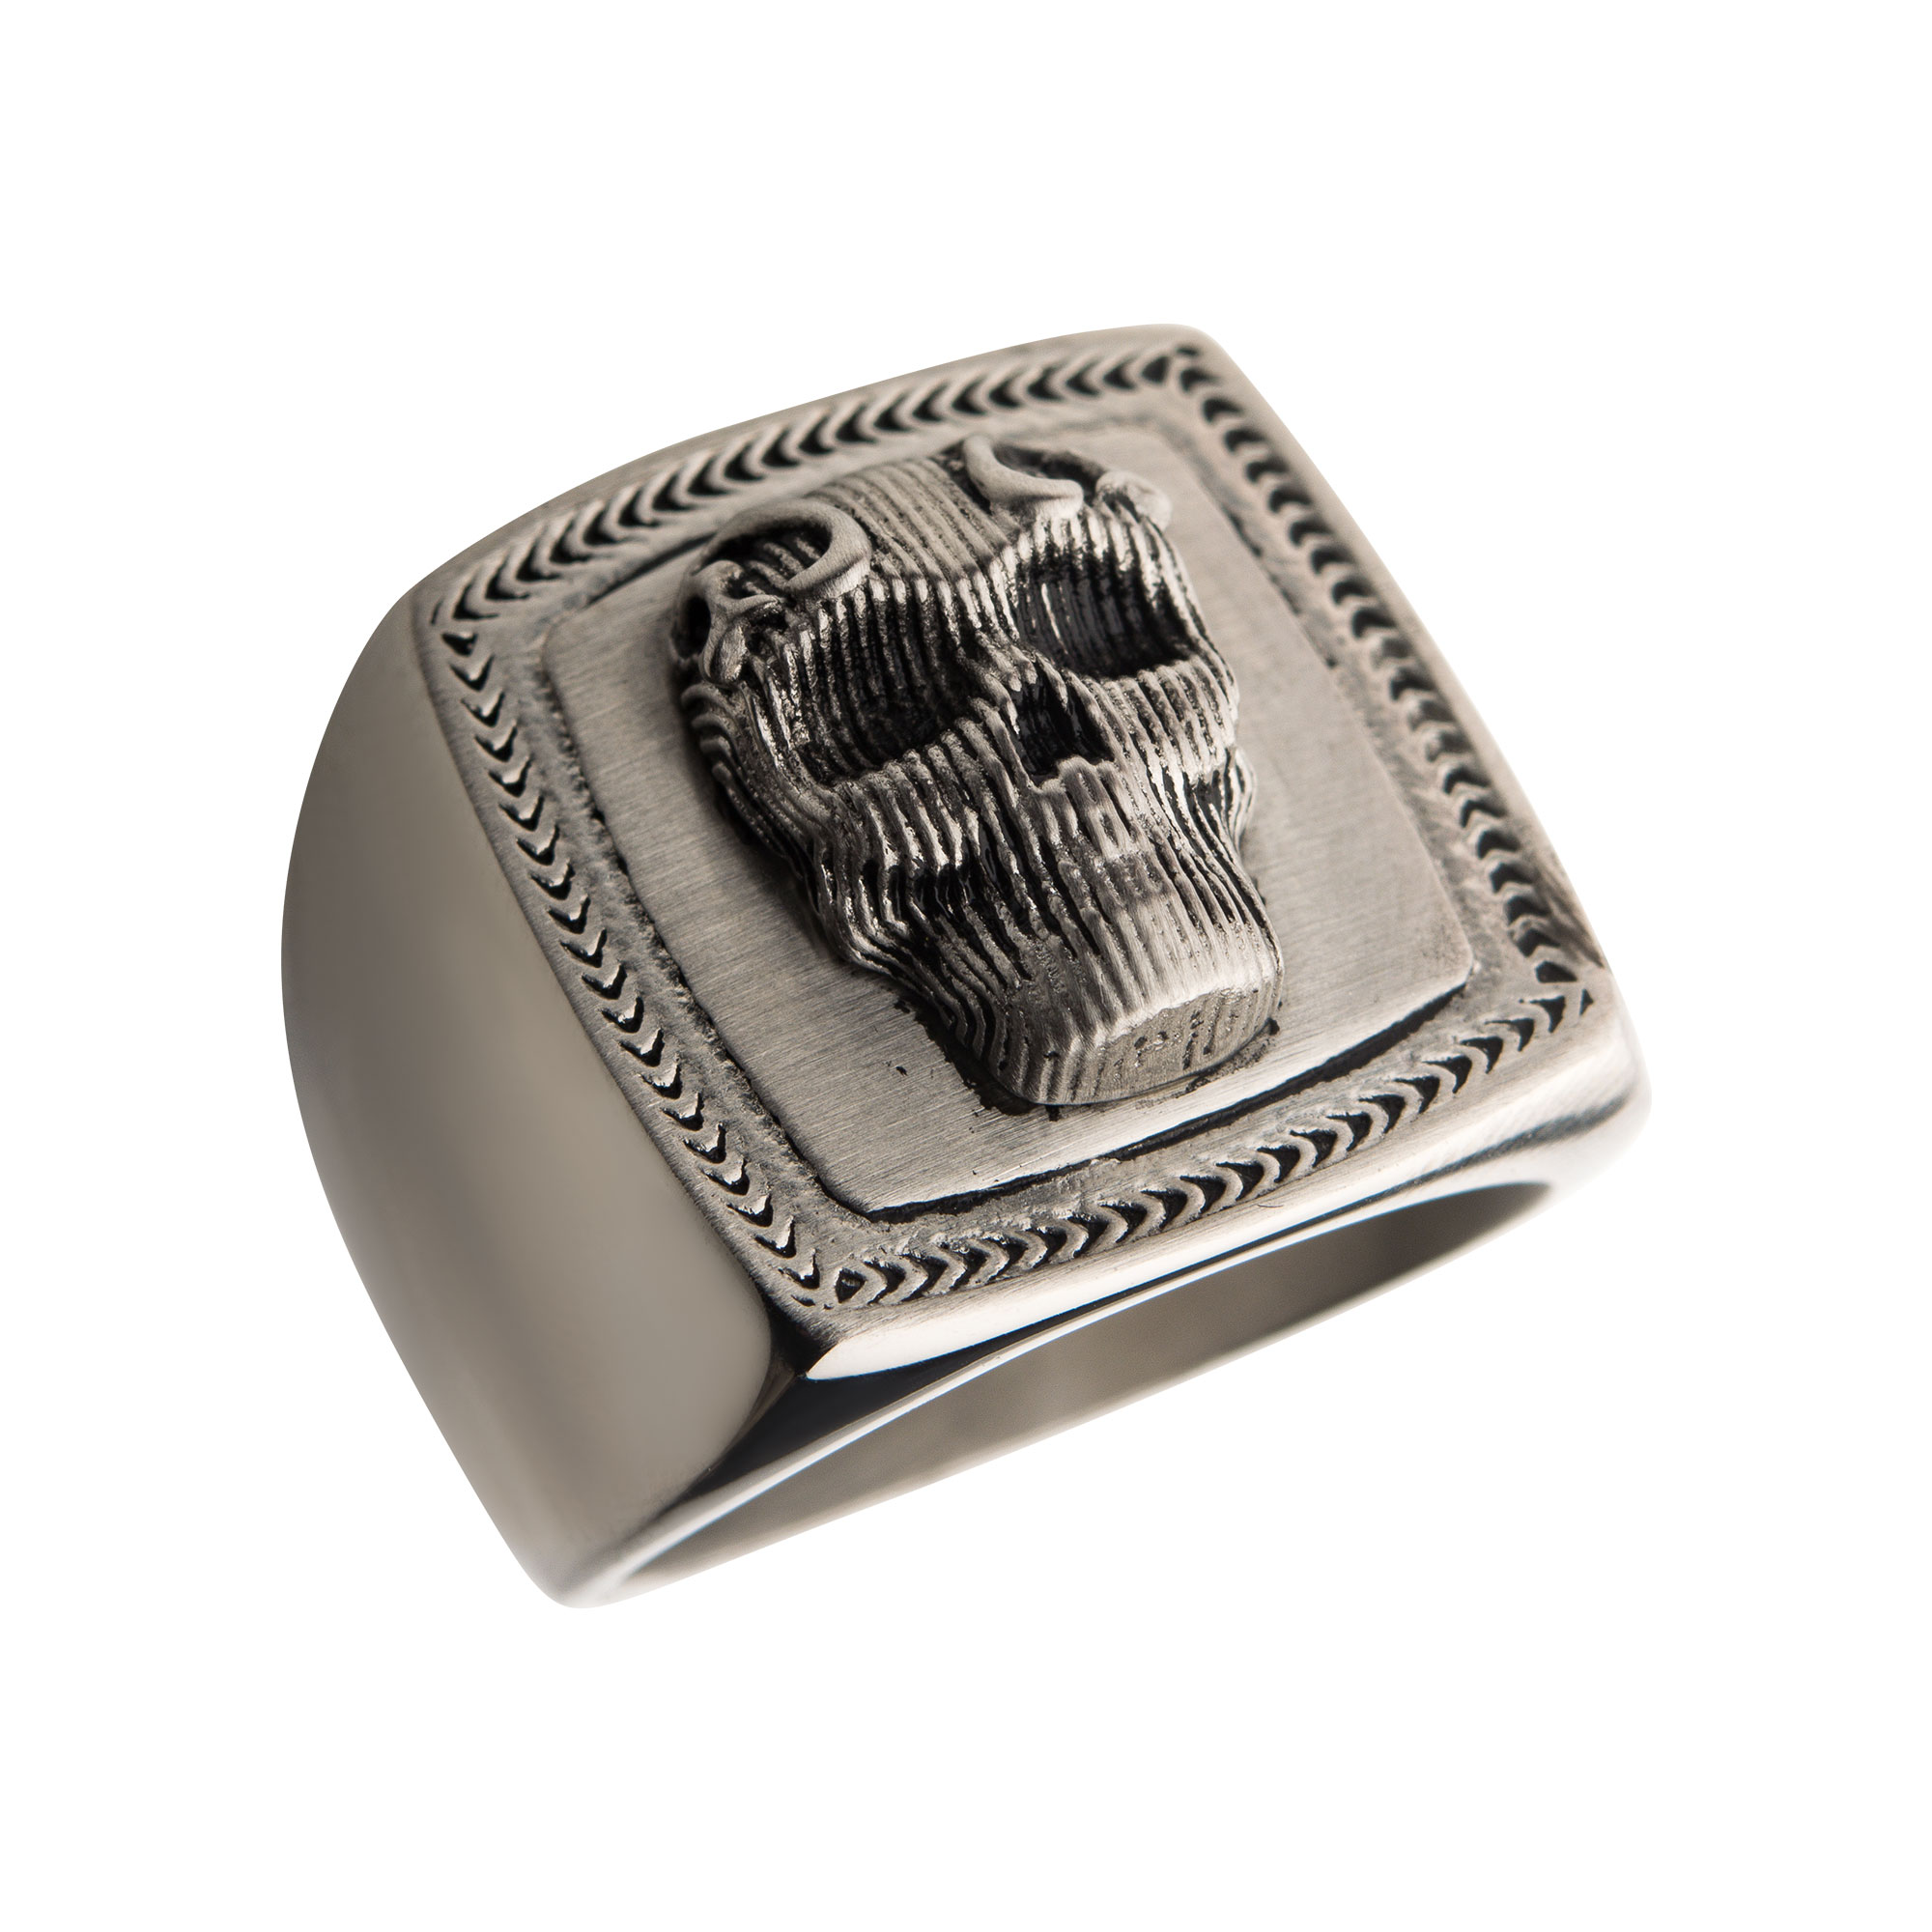 Black Oxidized Matte Finish Steel 3D Skull Ring Enchanted Jewelry Plainfield, CT